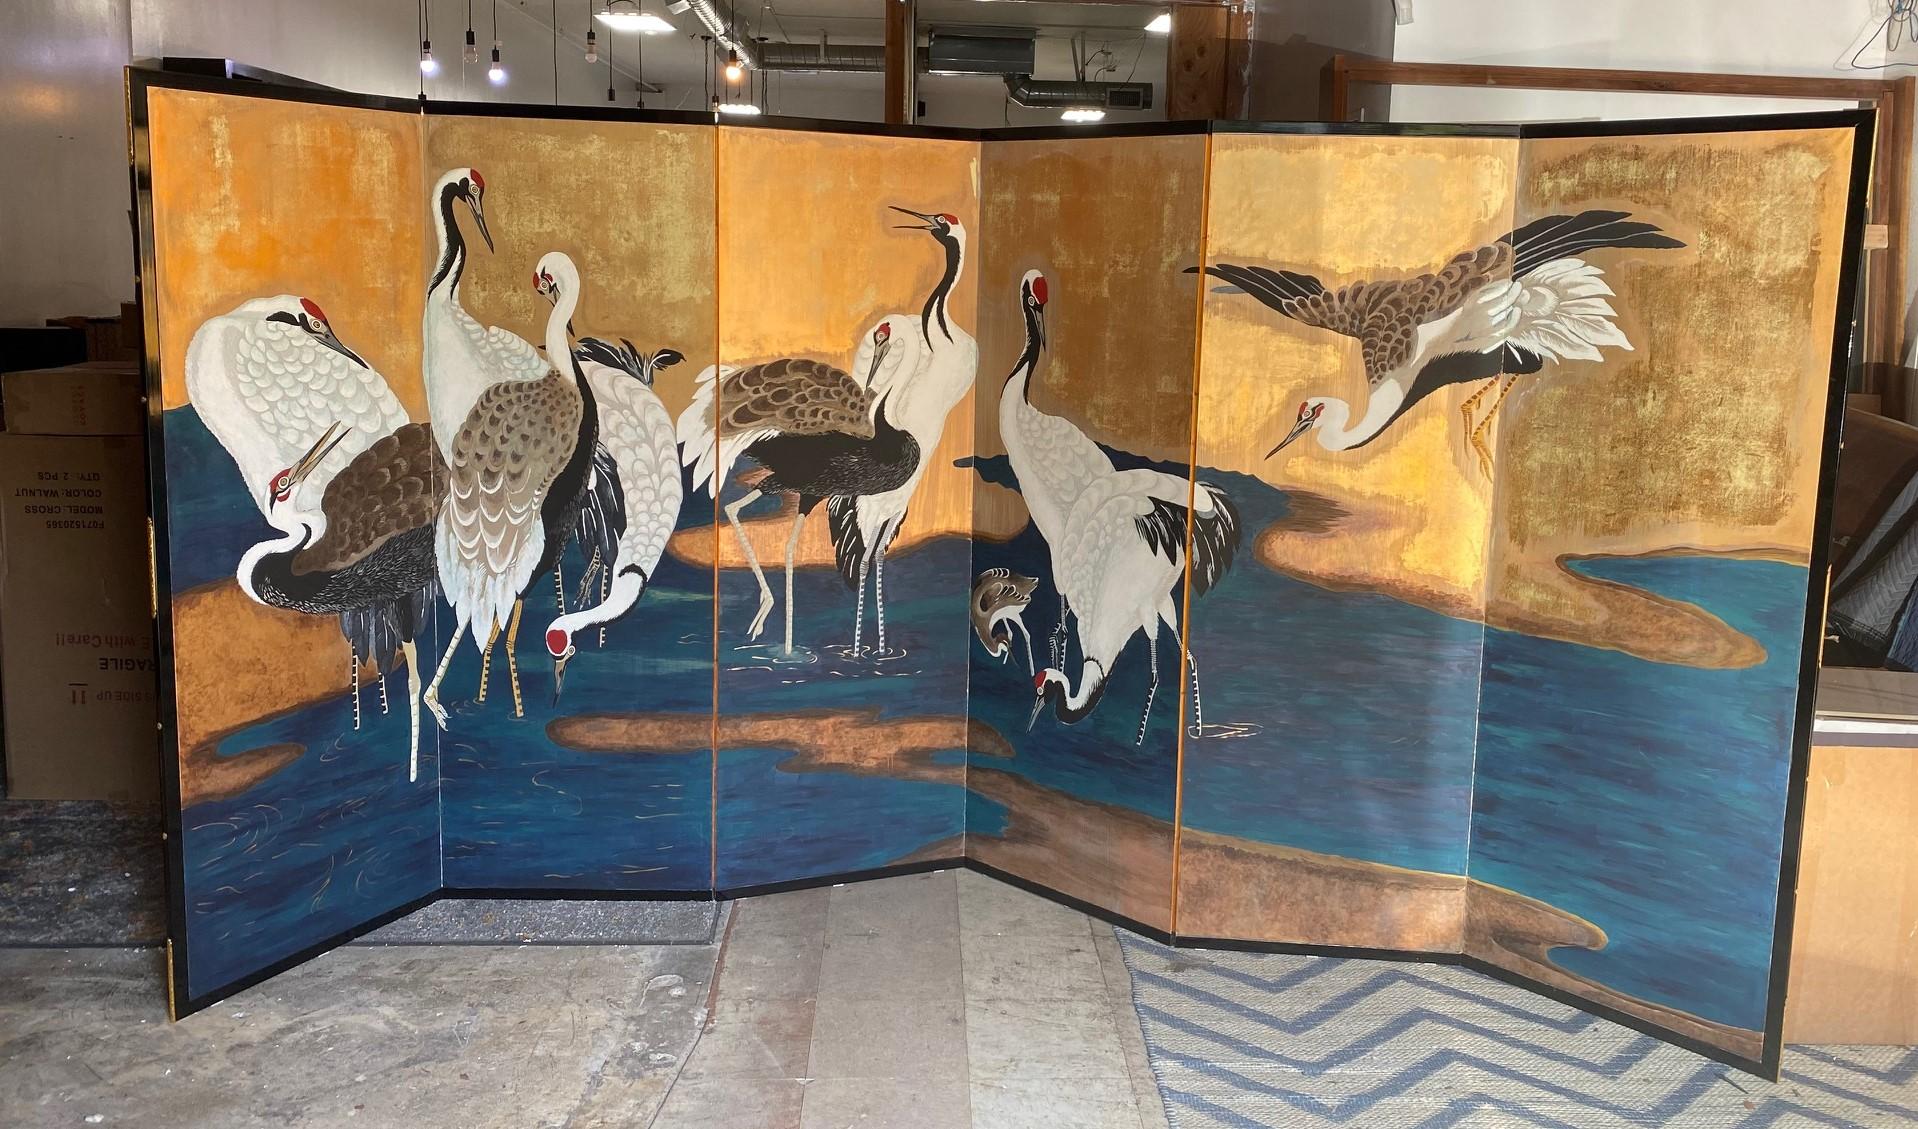 A gorgeous, very large six-panel Japanese Byobu folding screen depicting a group of cranes frolicking together in a stream/ lake. The beautiful, bold colors and hand-painted detail really make this an attractive and special work. The whole scene -